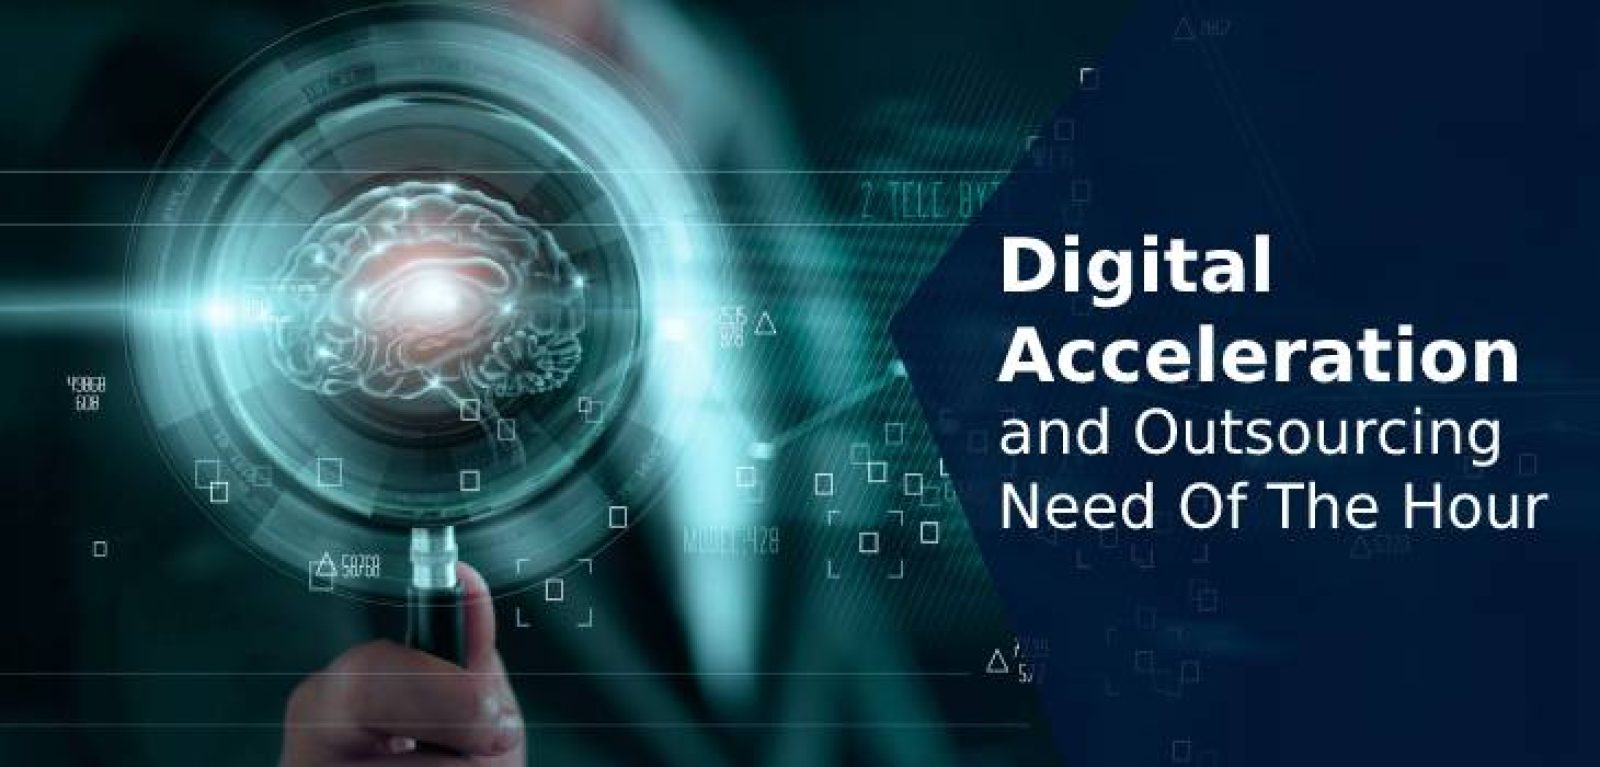 Digital Acceleration and Outsourcing Need of the Hour